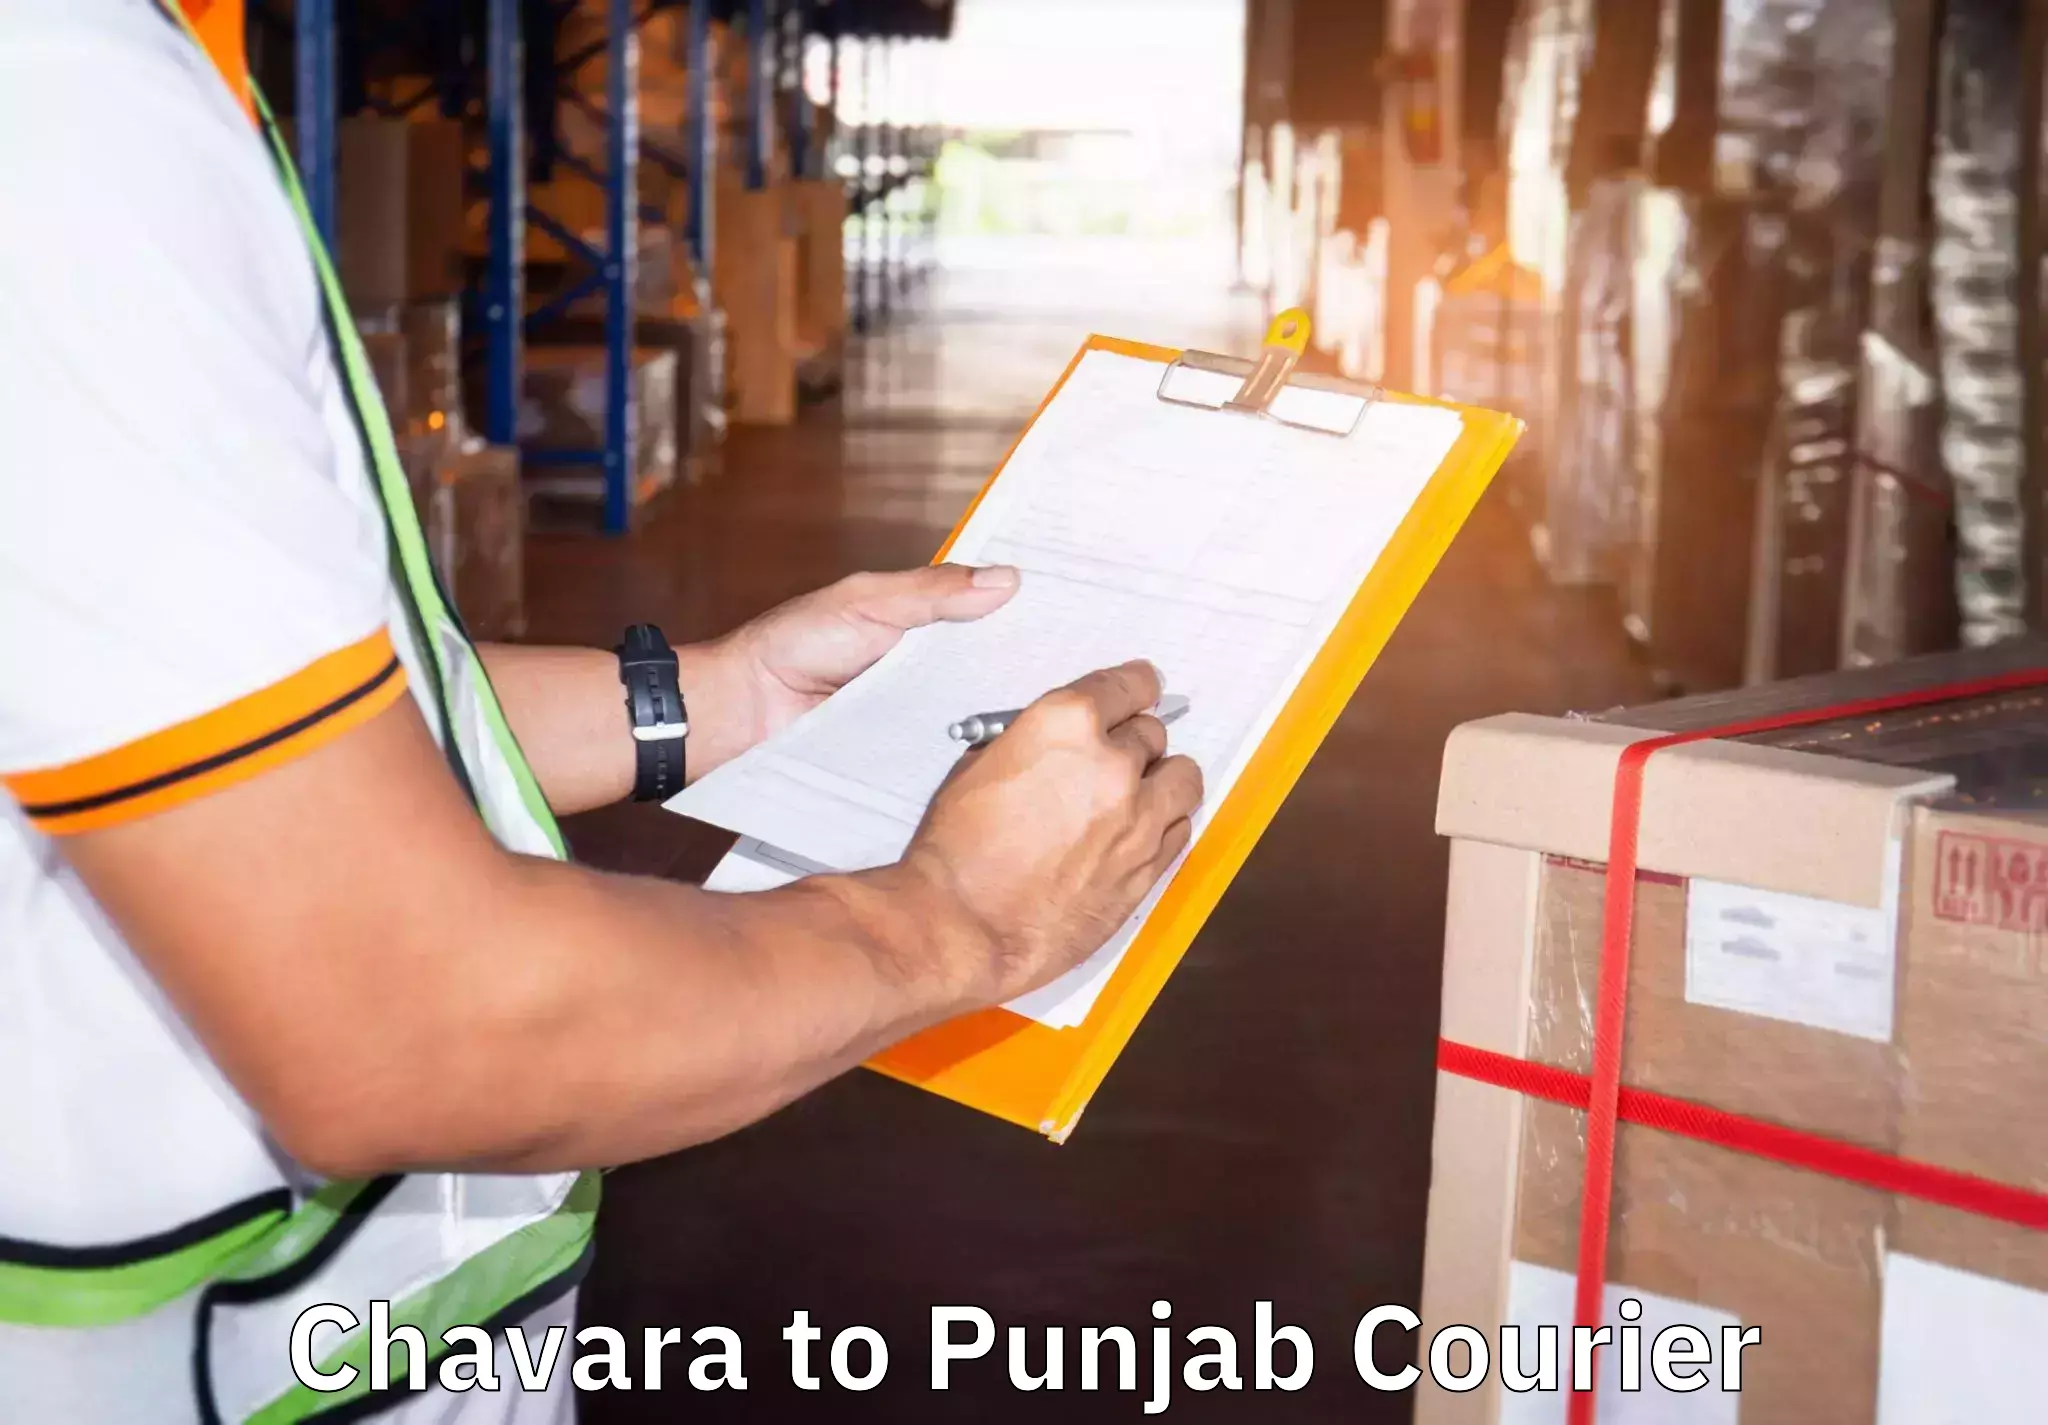 Moving service excellence Chavara to Punjab